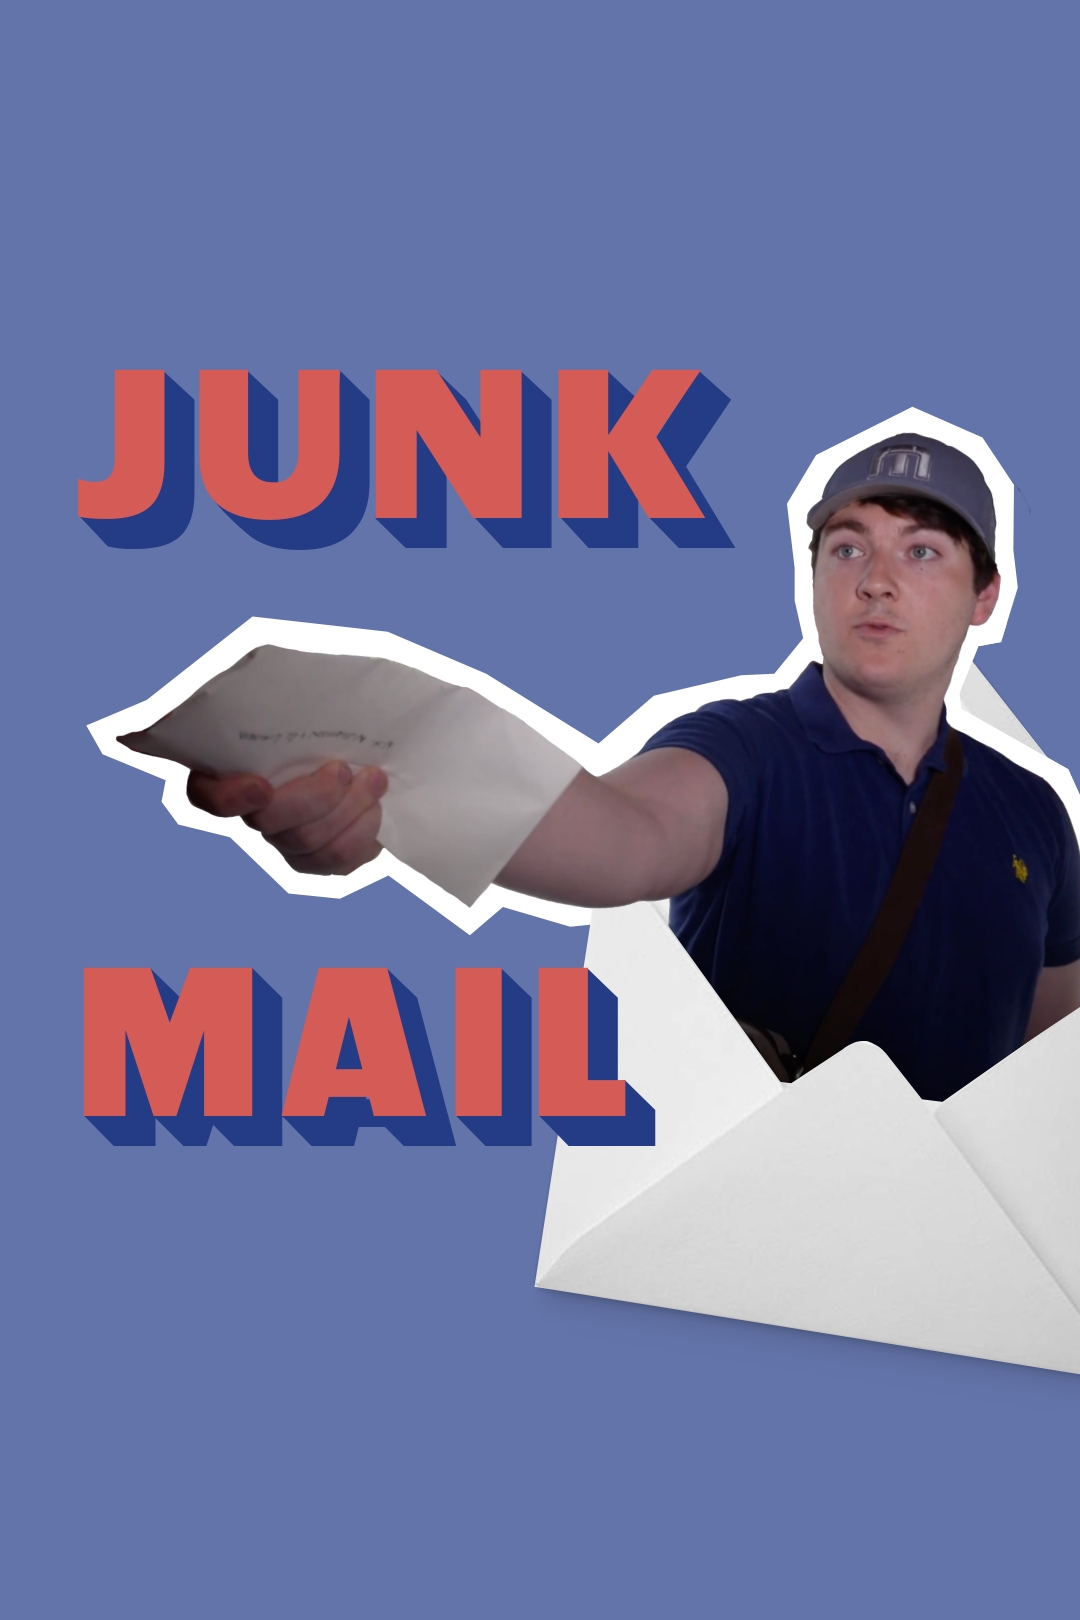 Poster for the film "Junk Mail"